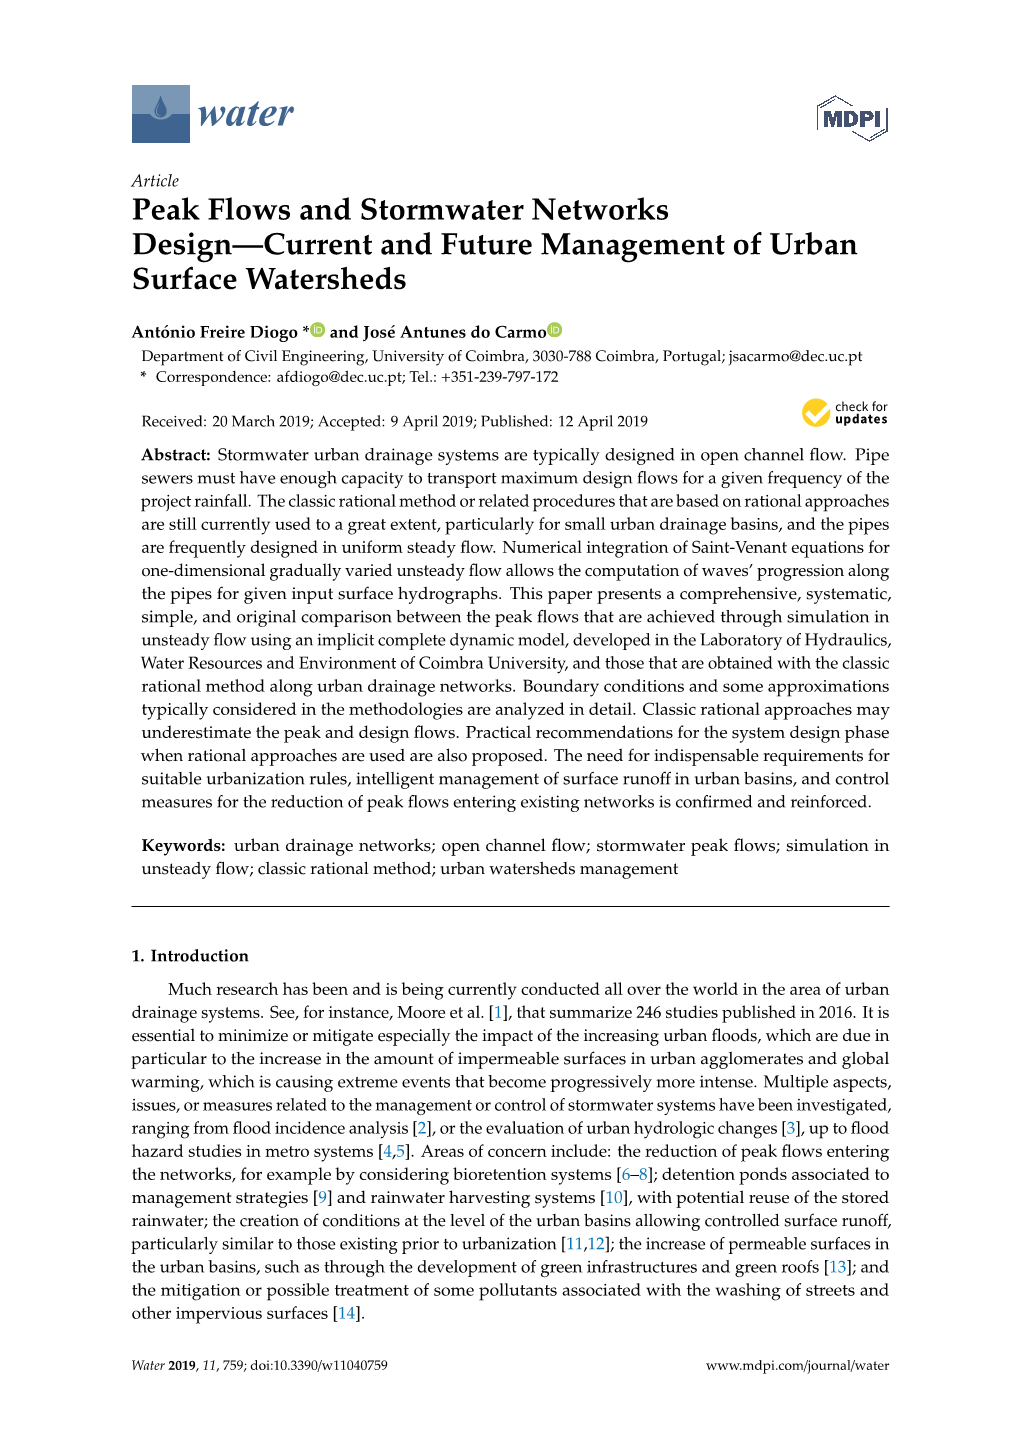 Peak Flows and Stormwater Networks Design—Current and Future Management of Urban Surface Watersheds